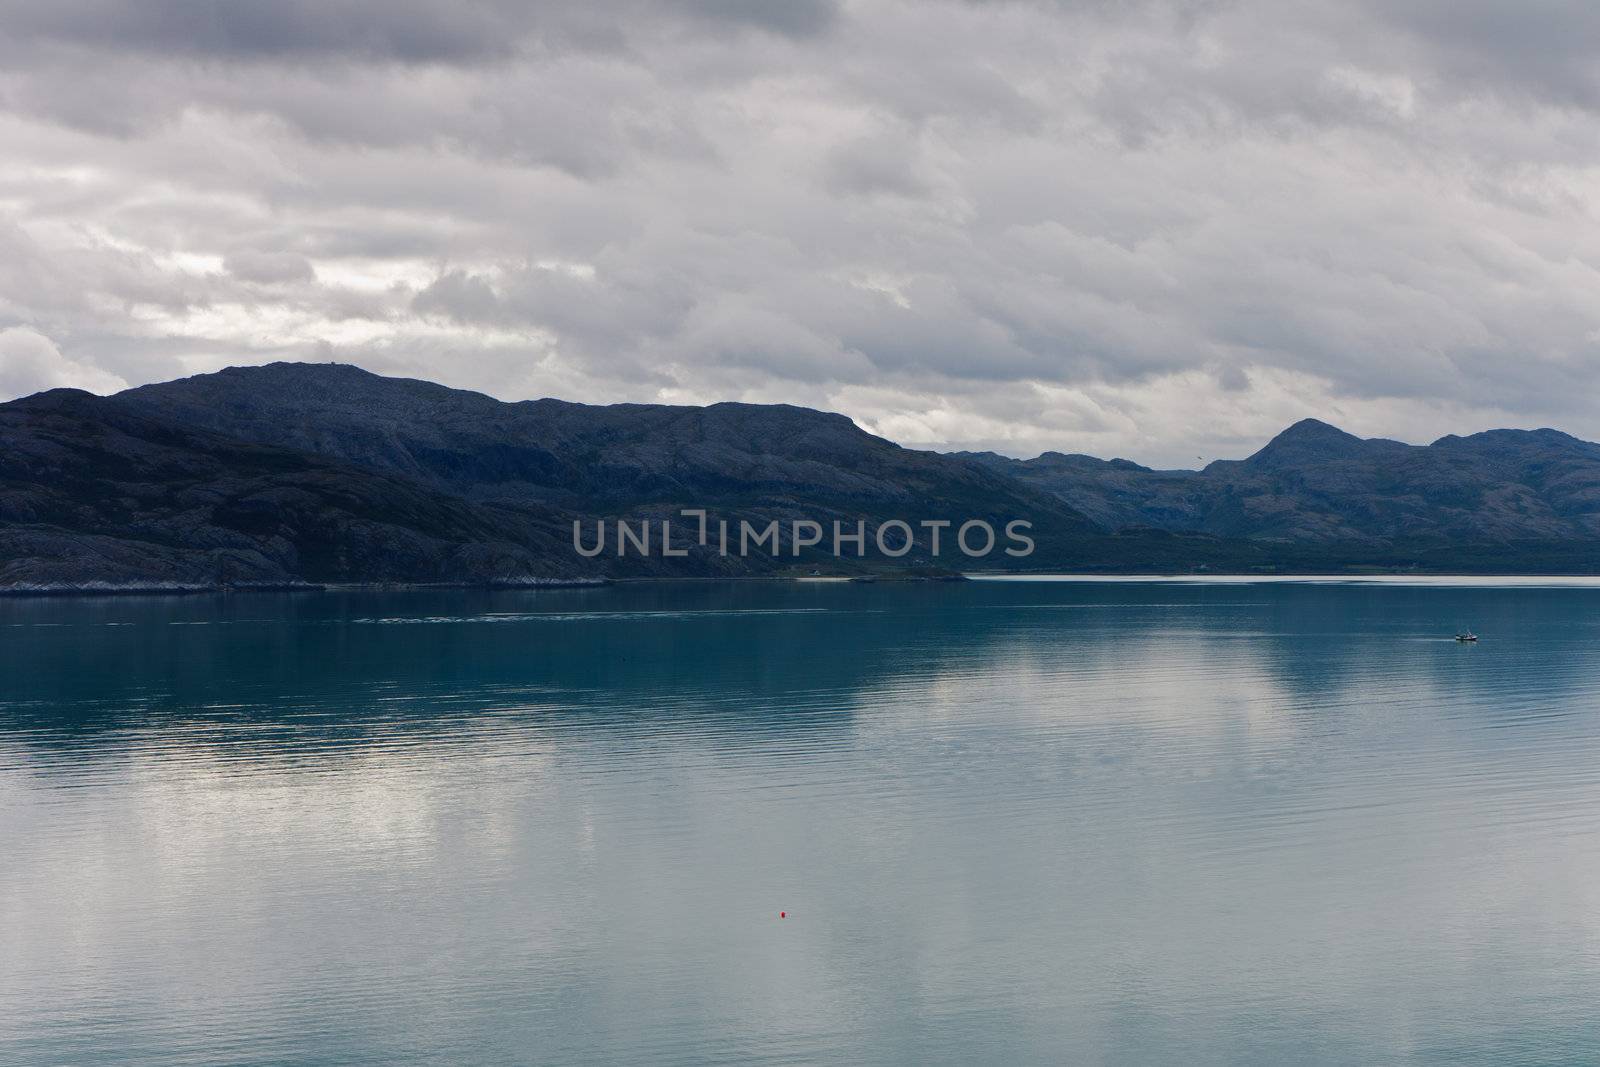 view of the mountains and fjords by Discovod